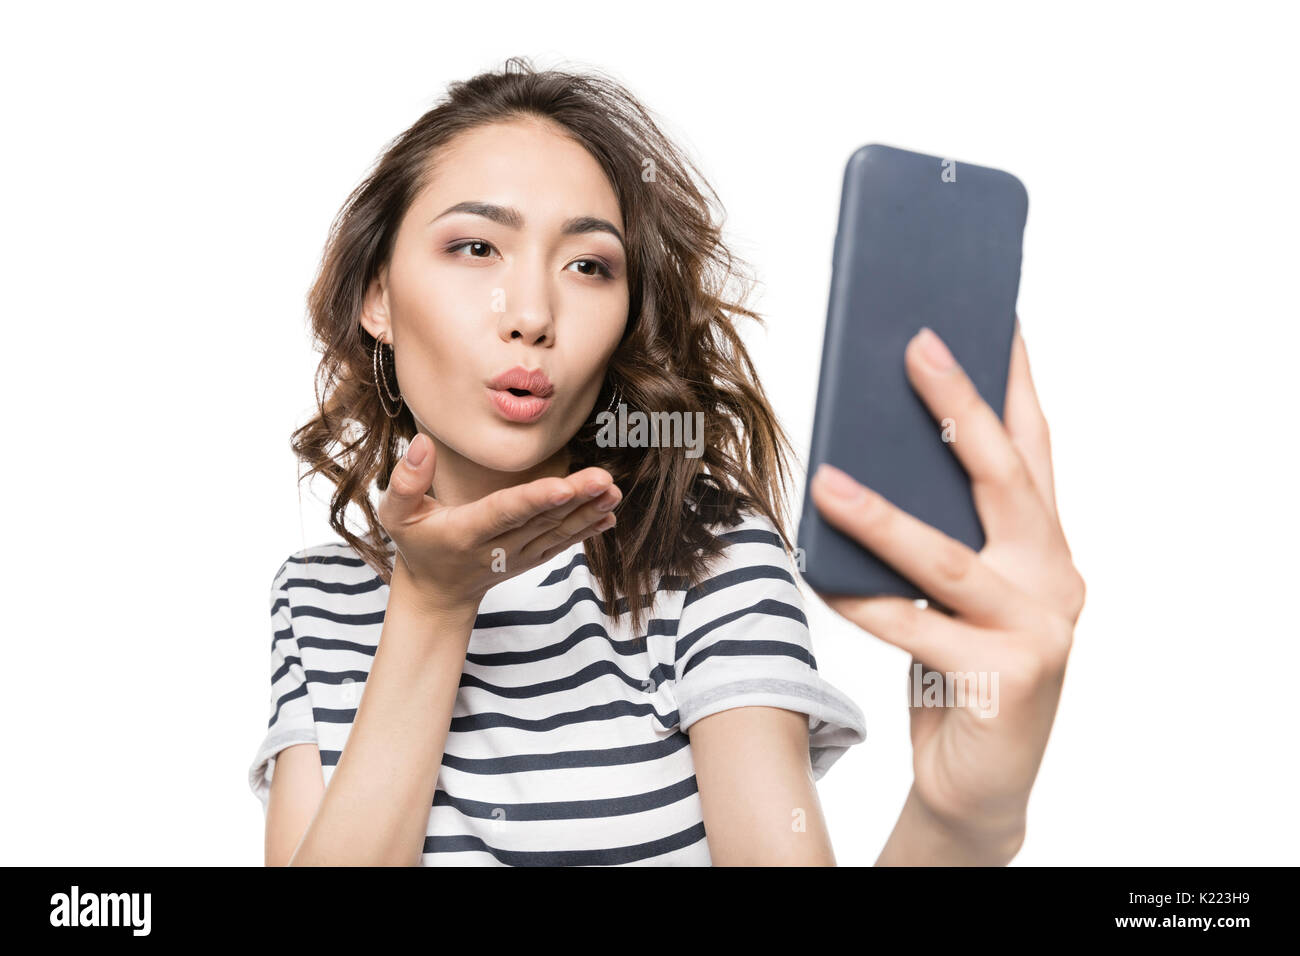 Woman Blowing Kiss While Taking Selfie On Smartphone Isolated On White